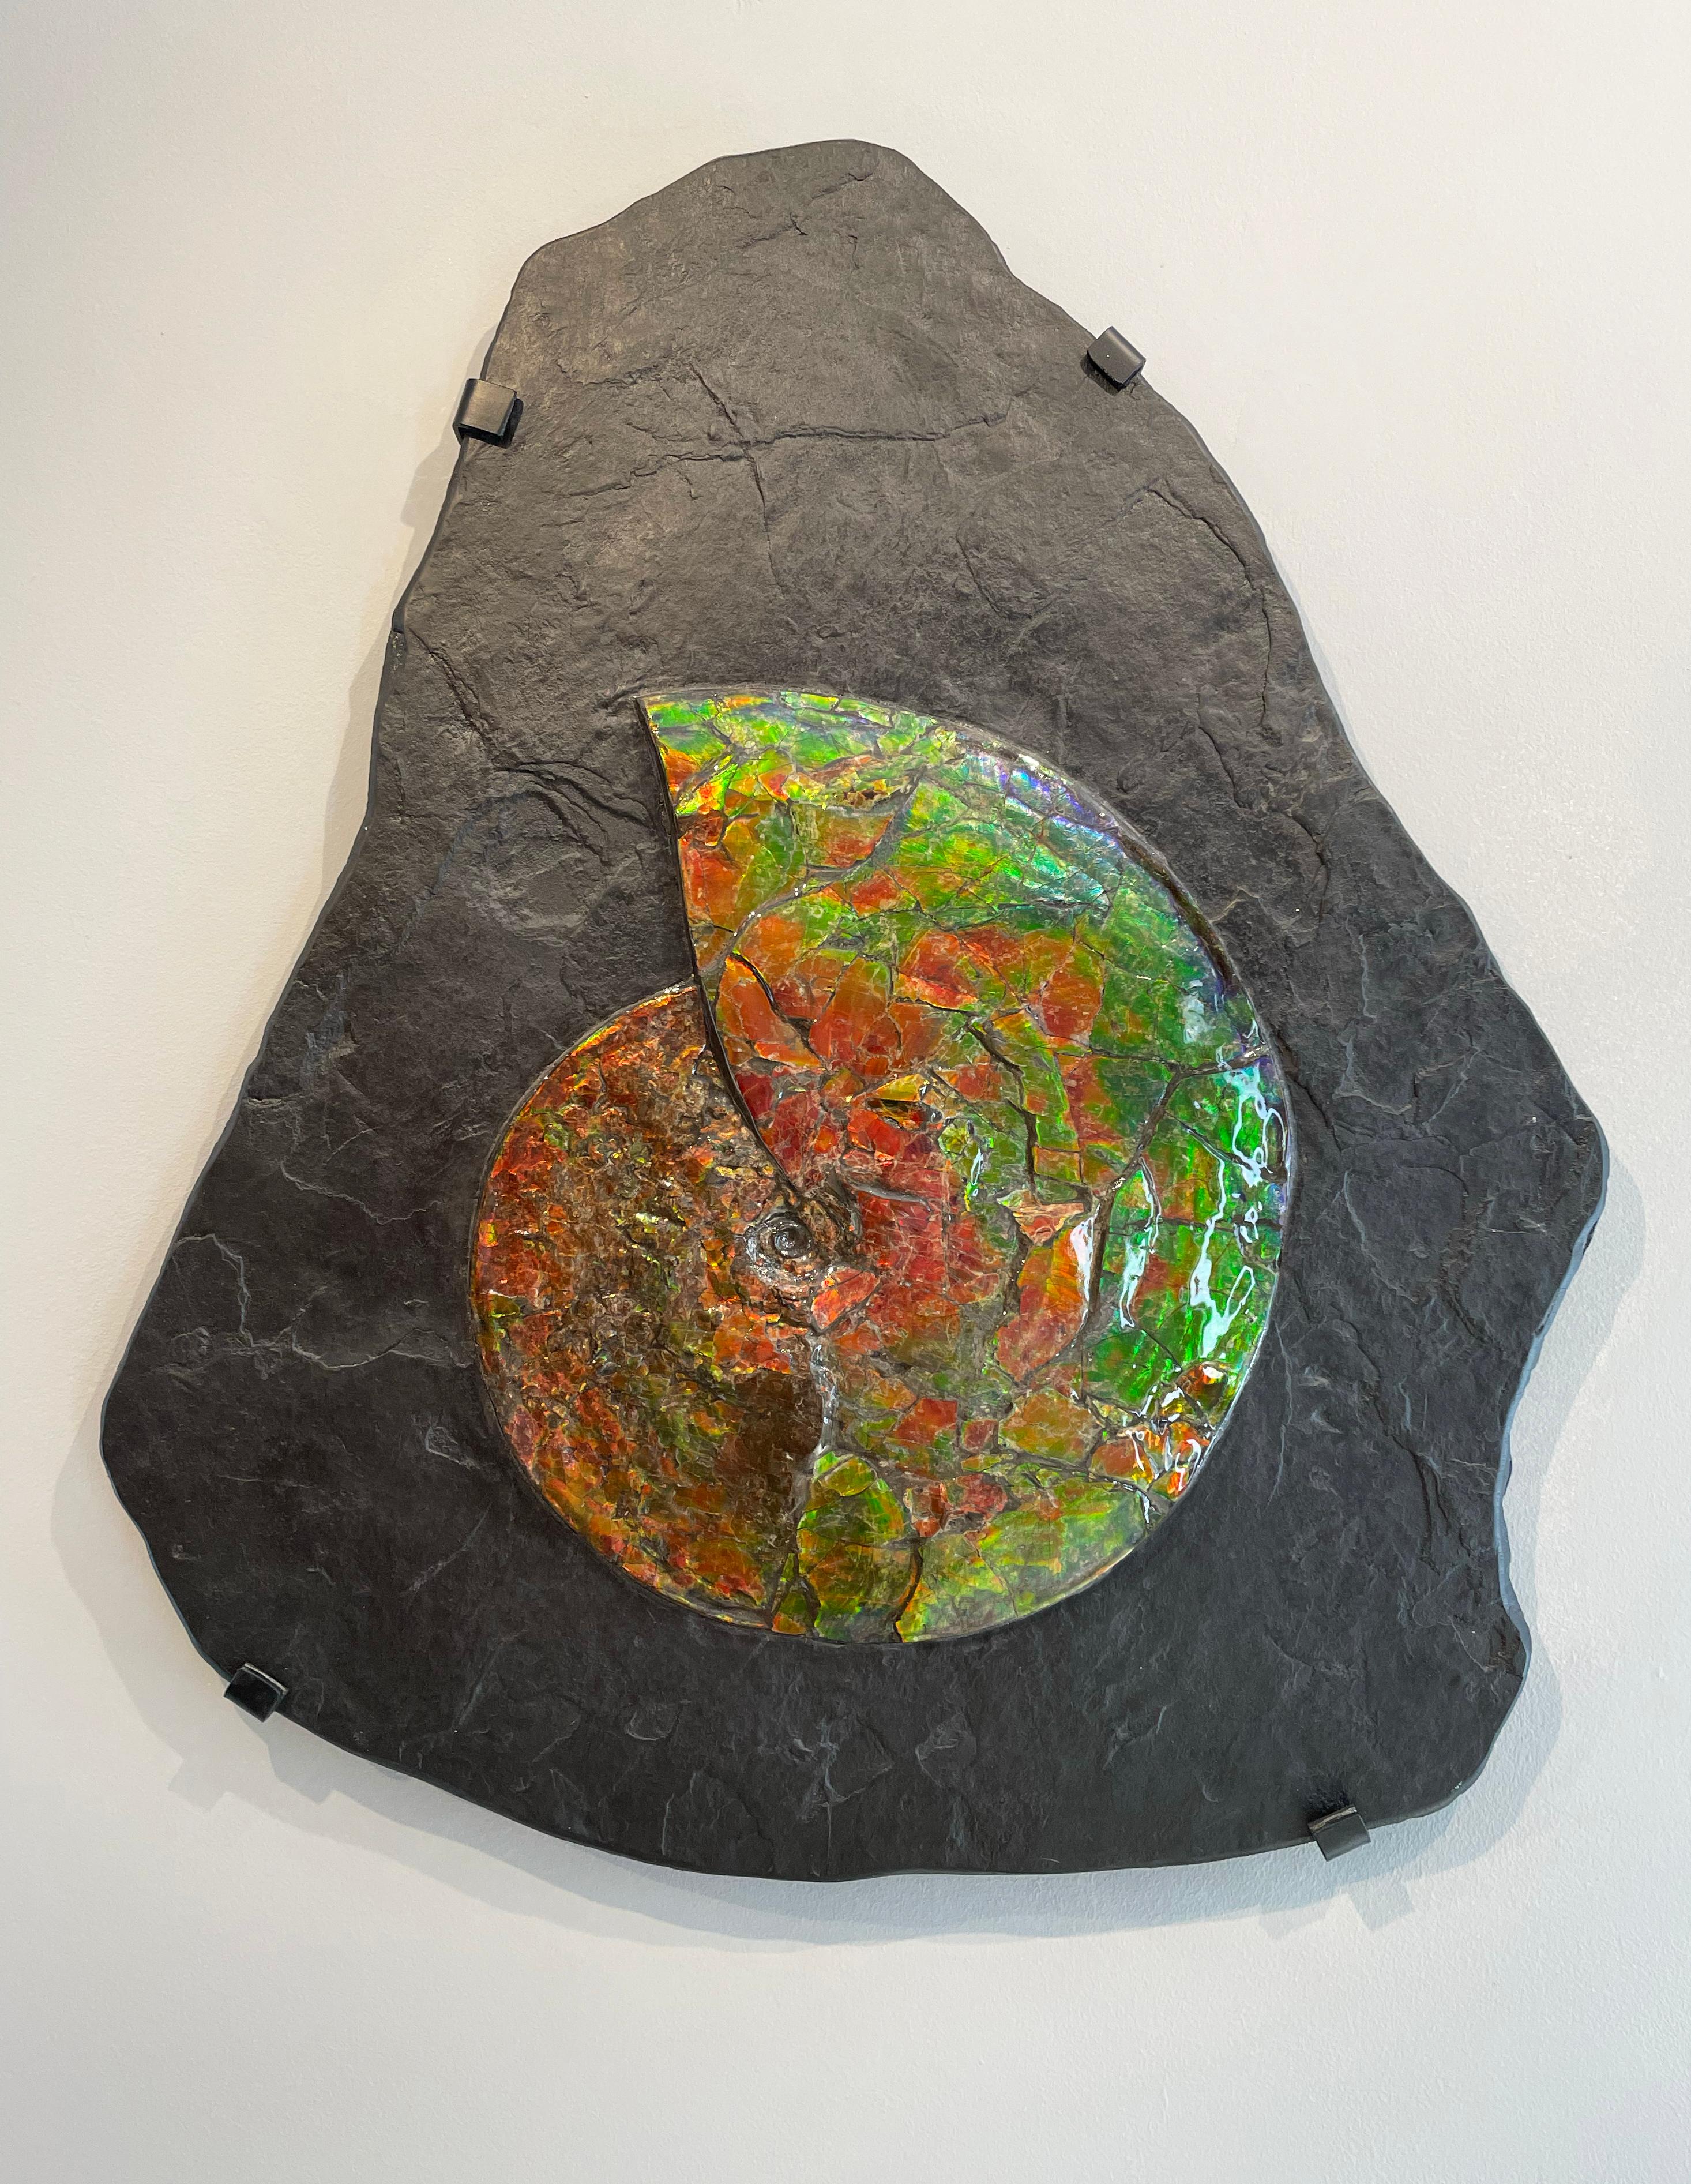 A Rare Iridescent Ammonite Fossil in Grey Slate Matrix

'Placenticeras intercalare'
Upper Cretaceous (75-72 million years ago)
Measures: 70 x 62 x 4 cm
Source in Alberta, Canada 

Known as ‘Ammolite’, the shimmering, metallic colours were caused by